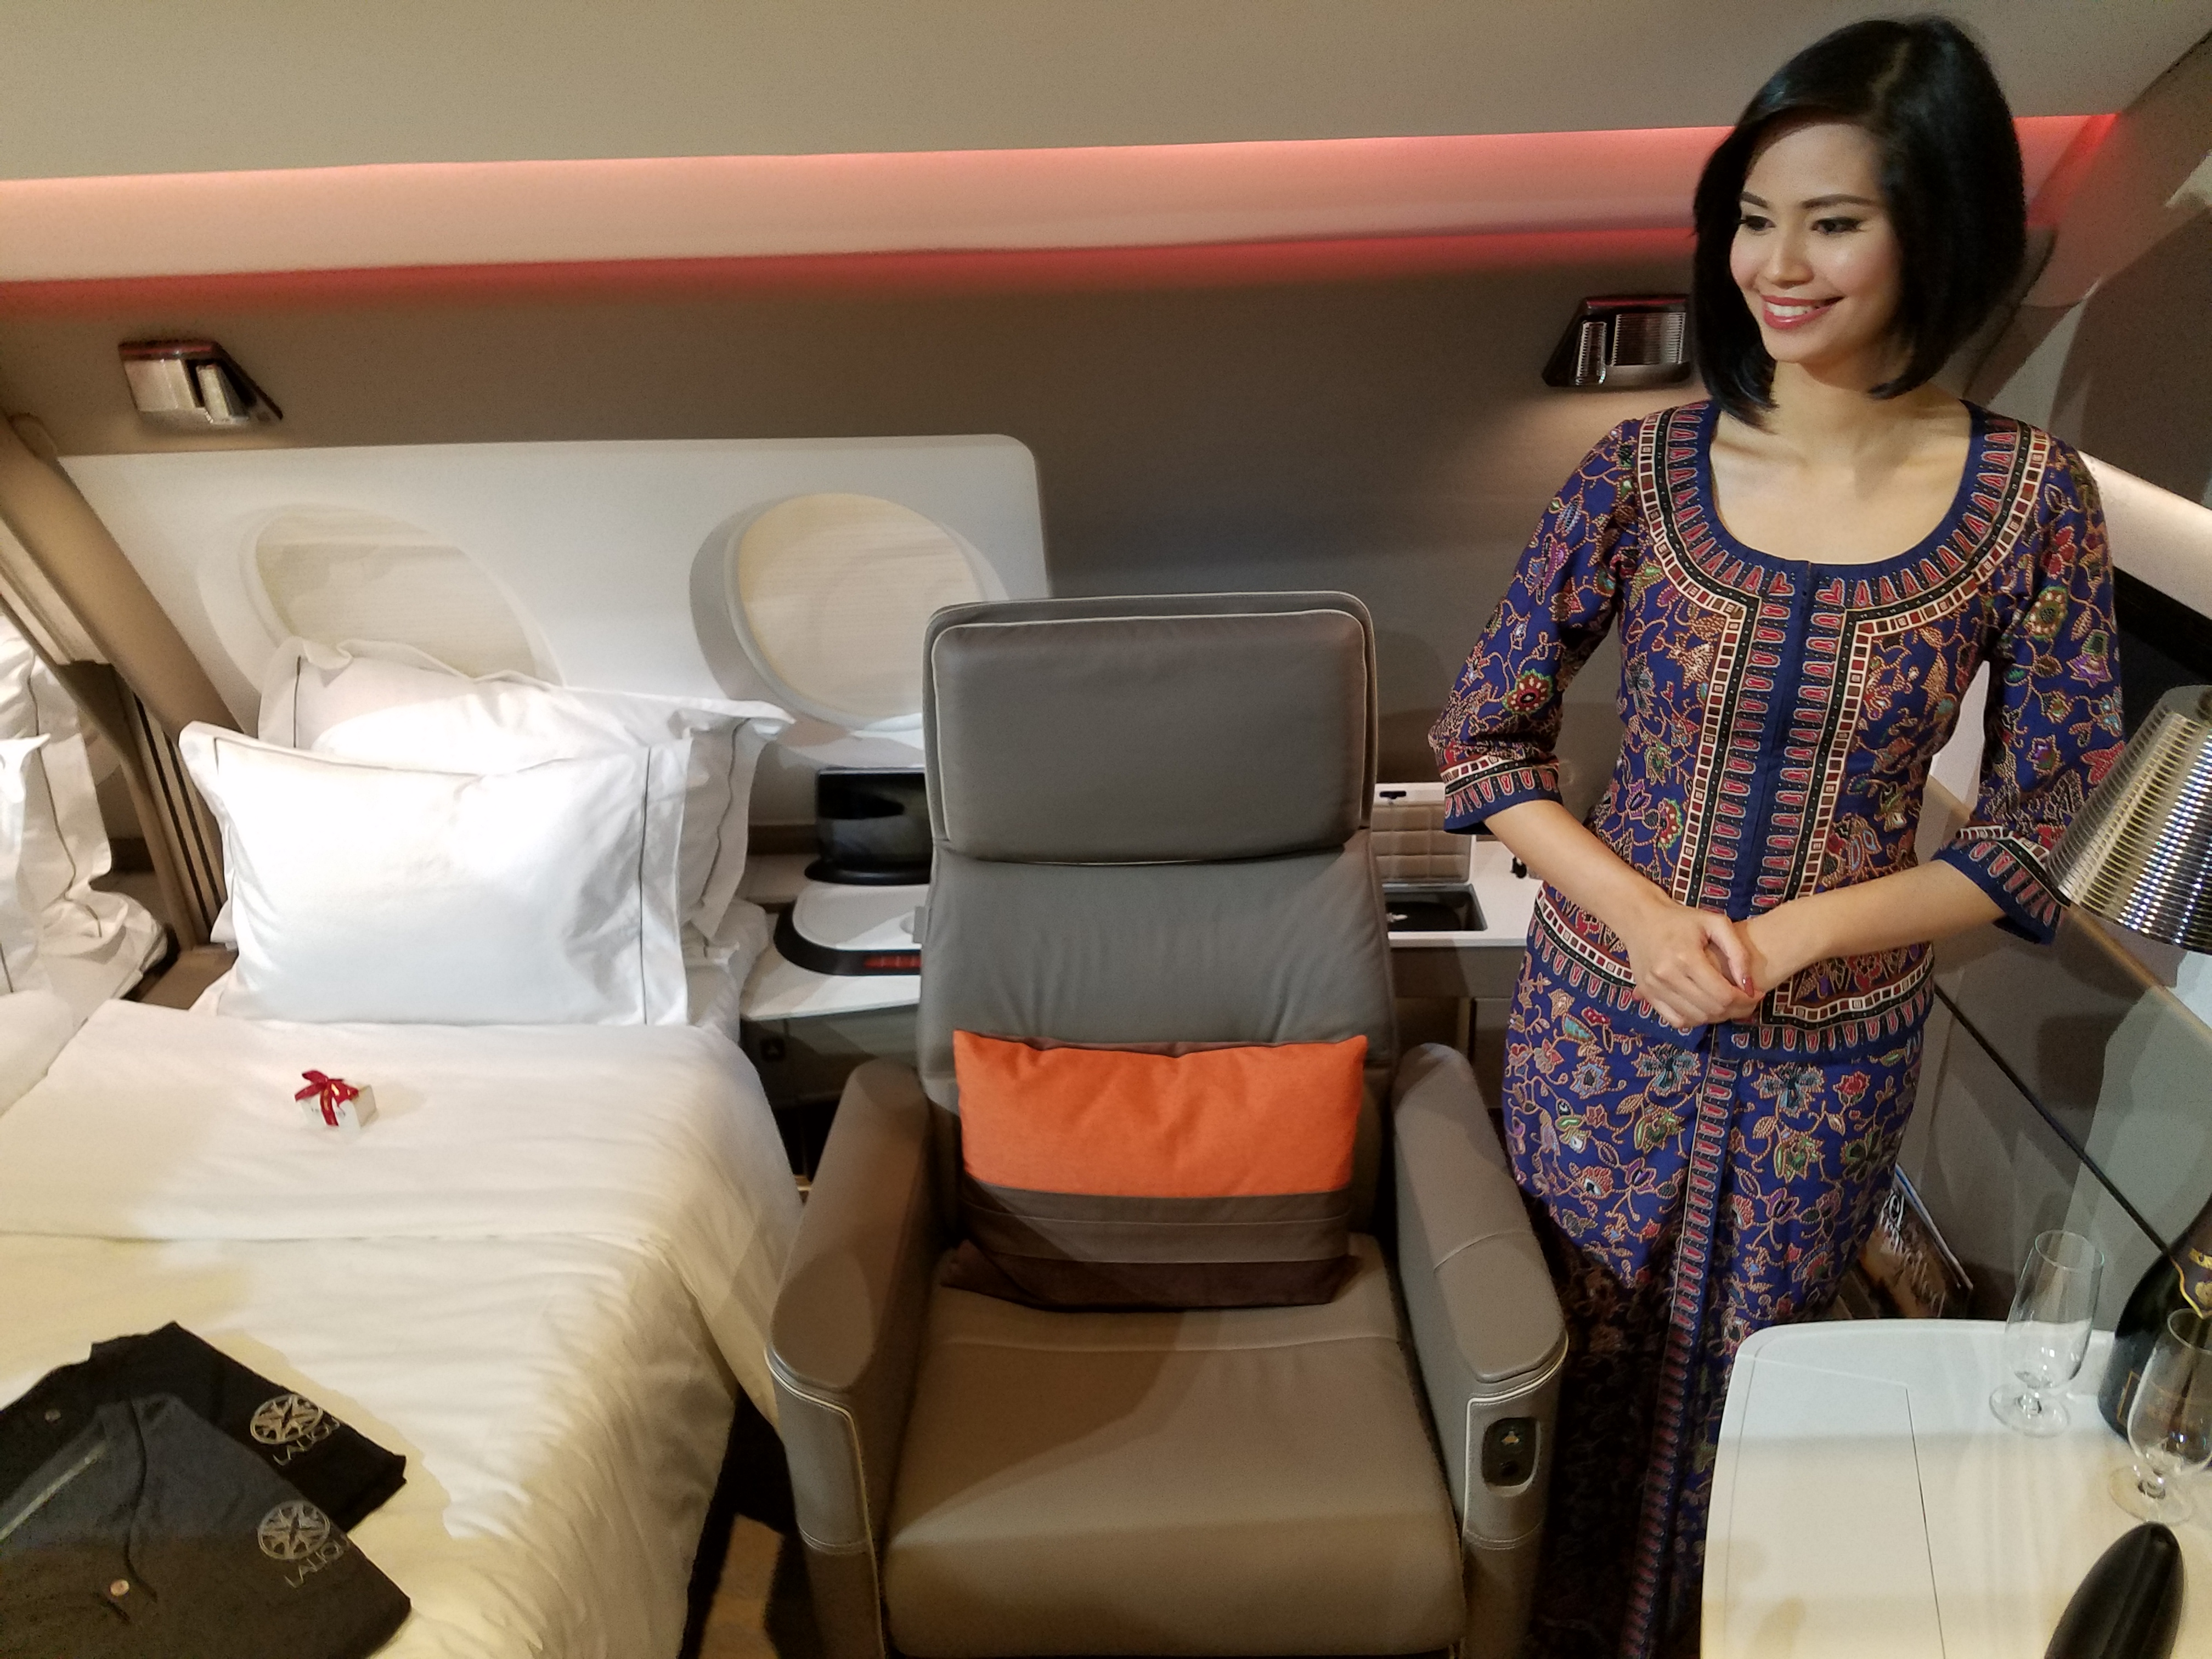 Singapore Airlines Airbus A380 First Class Awards Wide Open, March